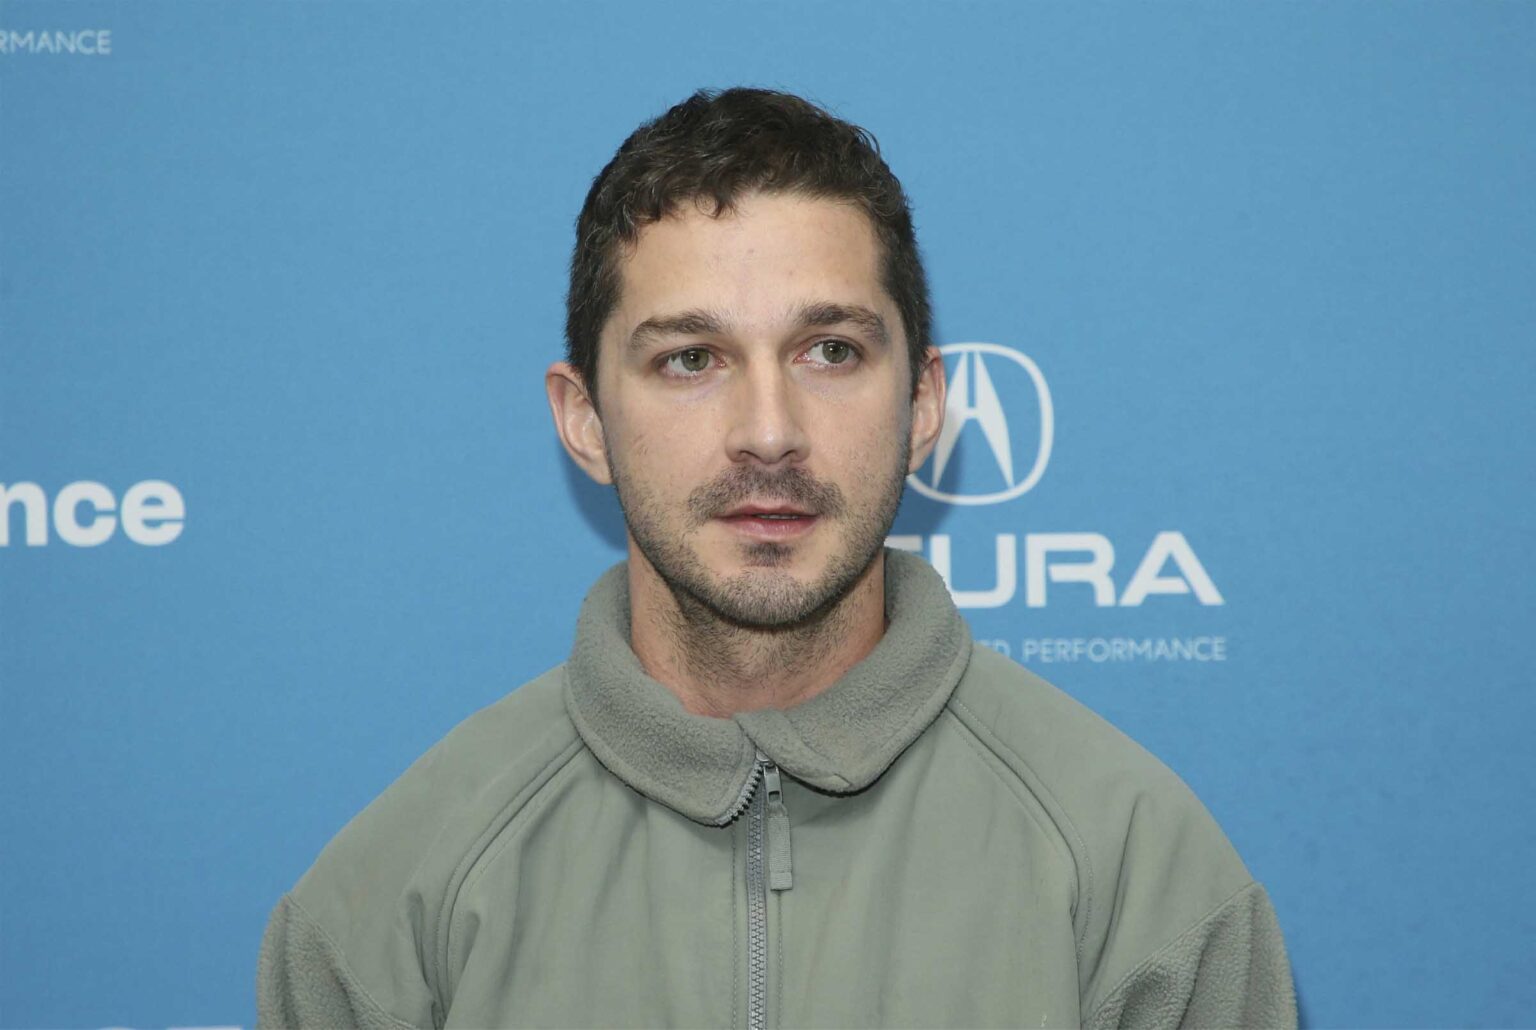 Is Shia LaBeouf now without an agent? Rumors state that he was dropped after a string of abuse allegations more than one former girlfriend.